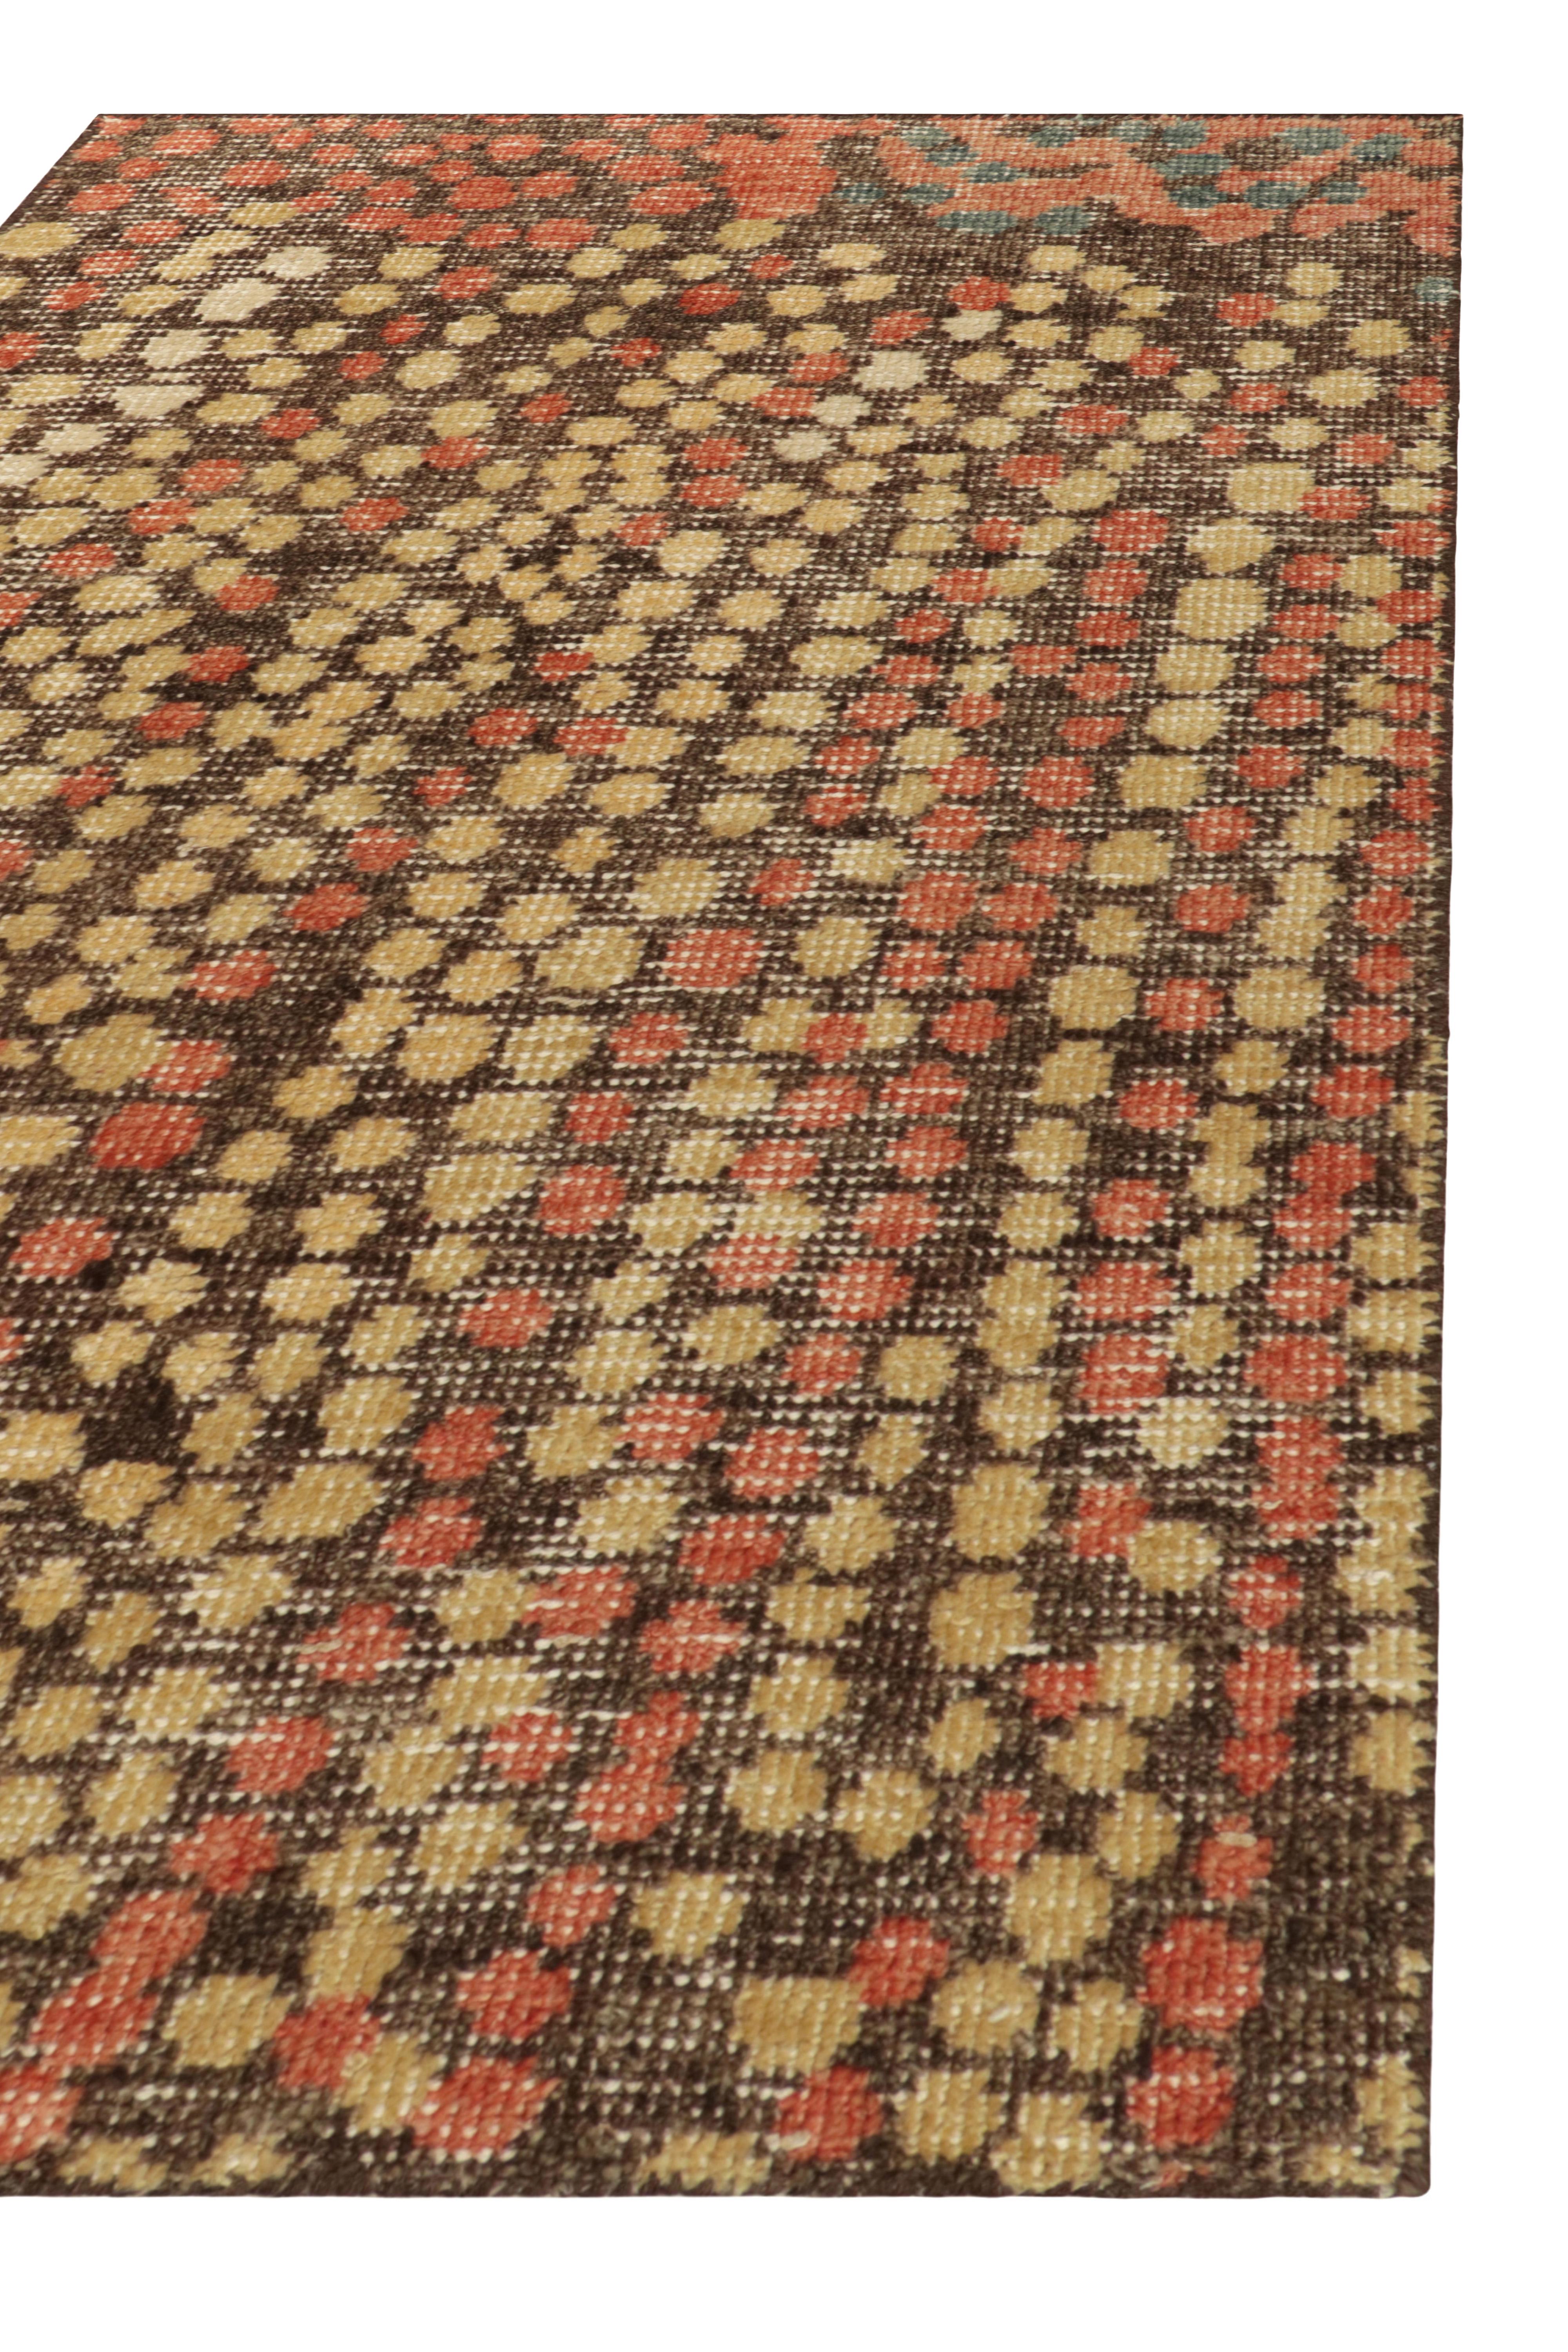 This 2x3 rug hails from the gift-size selections of Rug & Kilim’s Homage Collection, remarking a bold take on distressed style. This design enjoys a marriage of abstract ideas and dots patterns in orange-red, blue, and beige-brown. 

An ideal